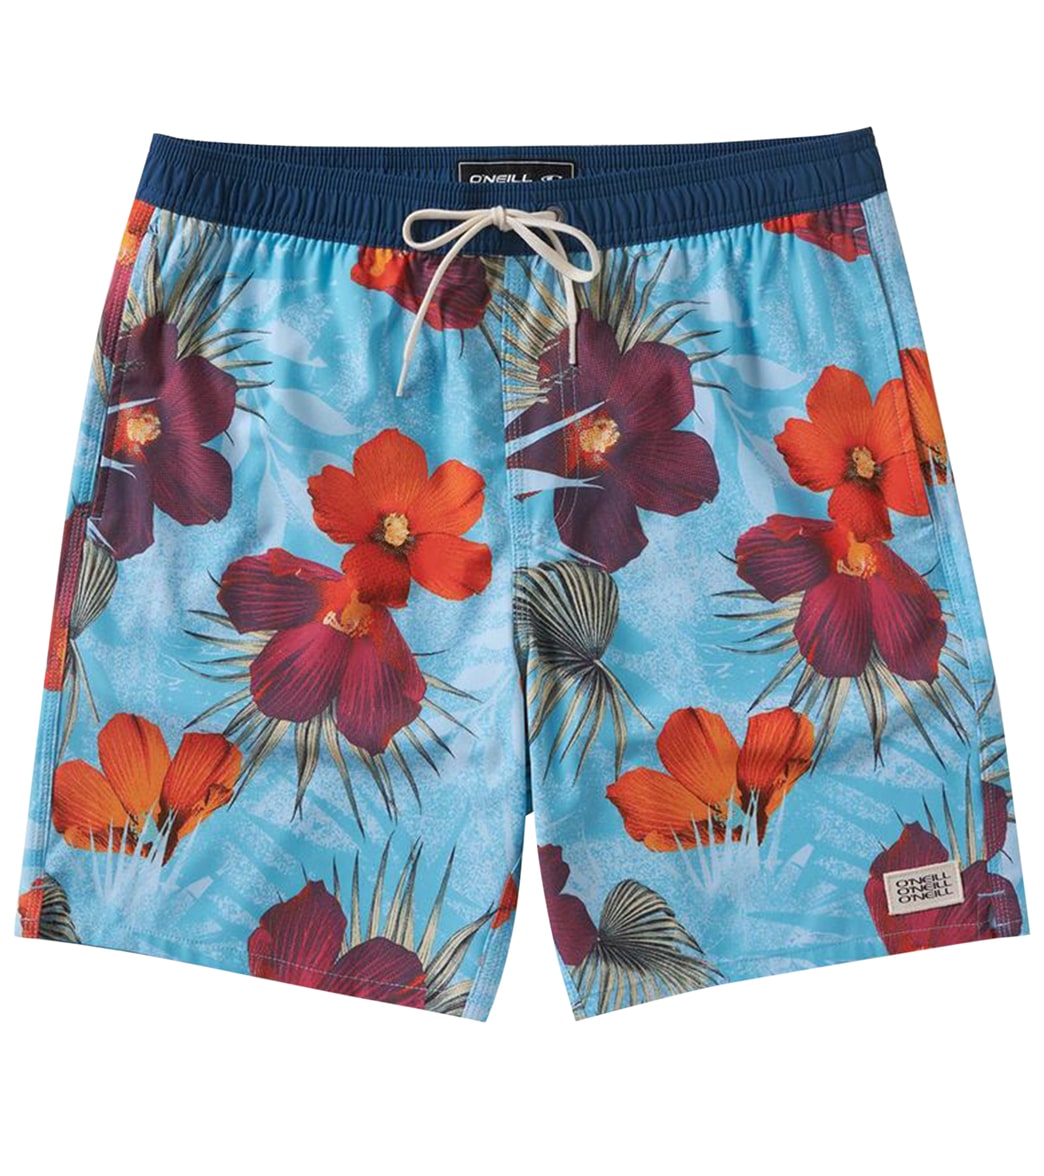 O'neill Men's 17 Mixed Up Volley Board Short - Cyan Large - Swimoutlet.com